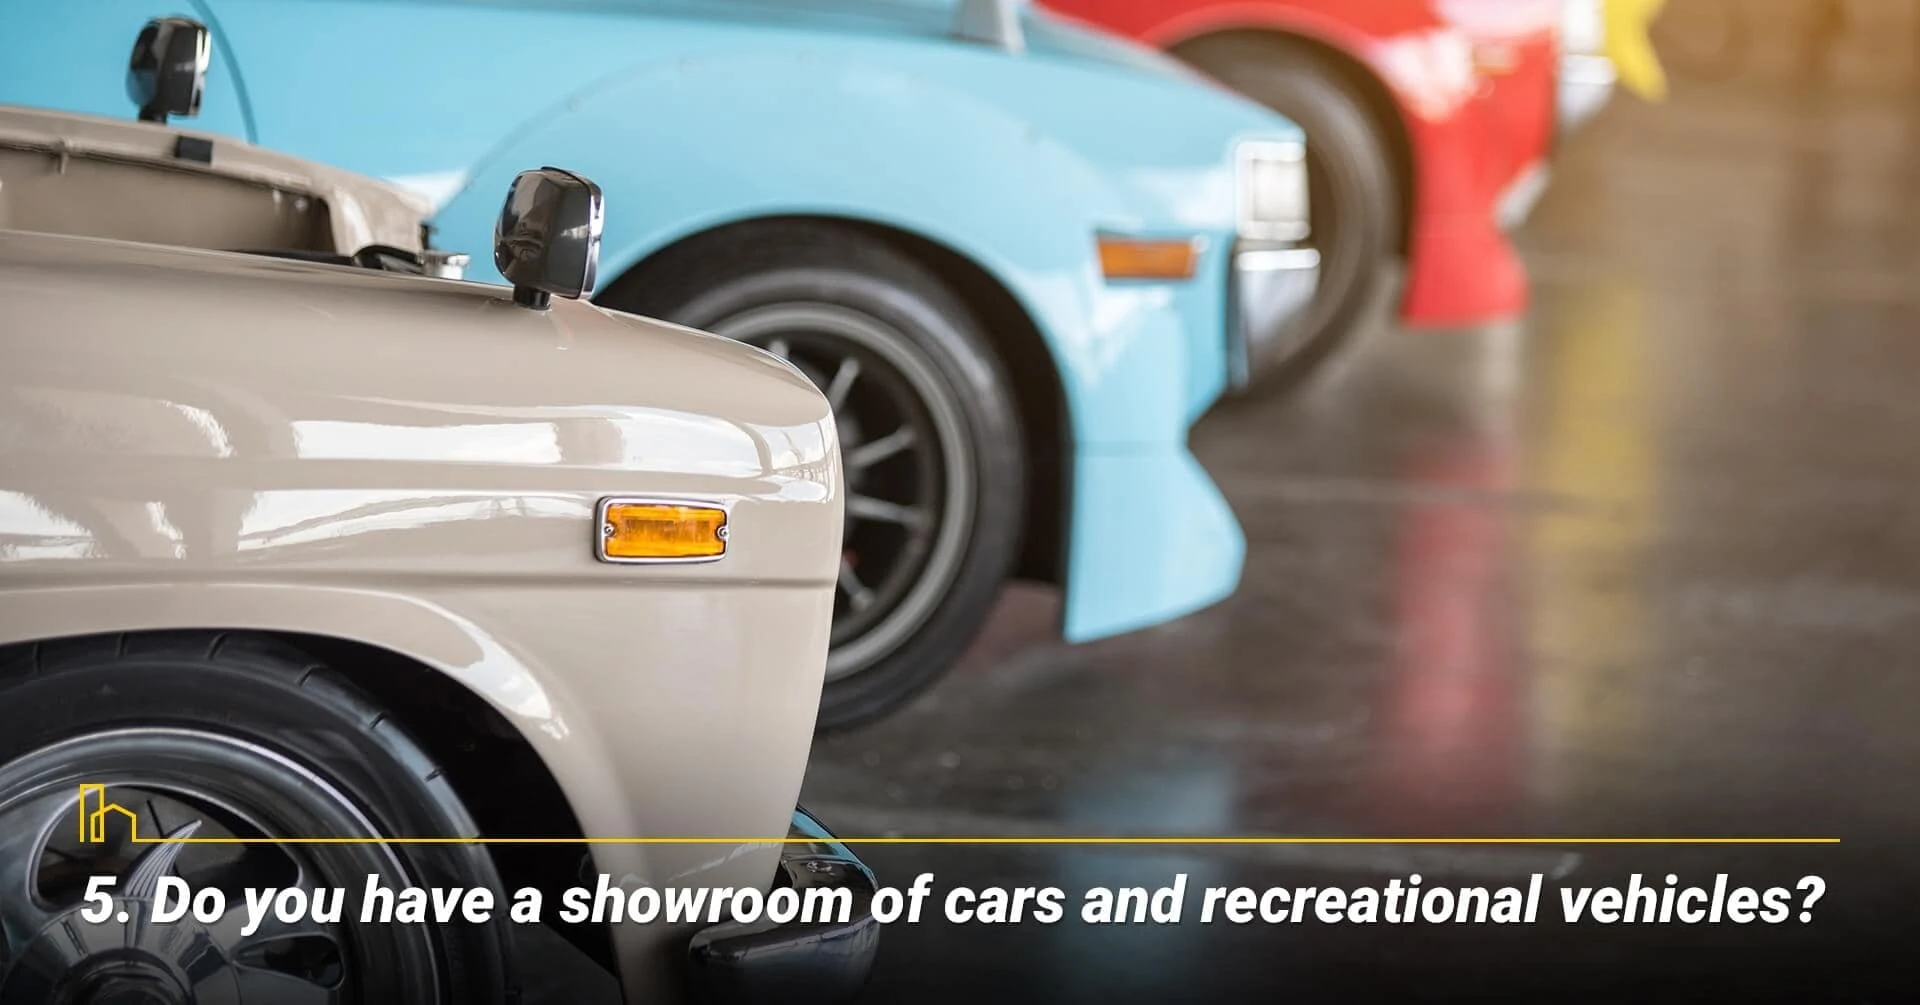 Do you have a showroom of cars and recreational vehicles? dealing with multiple vehicles